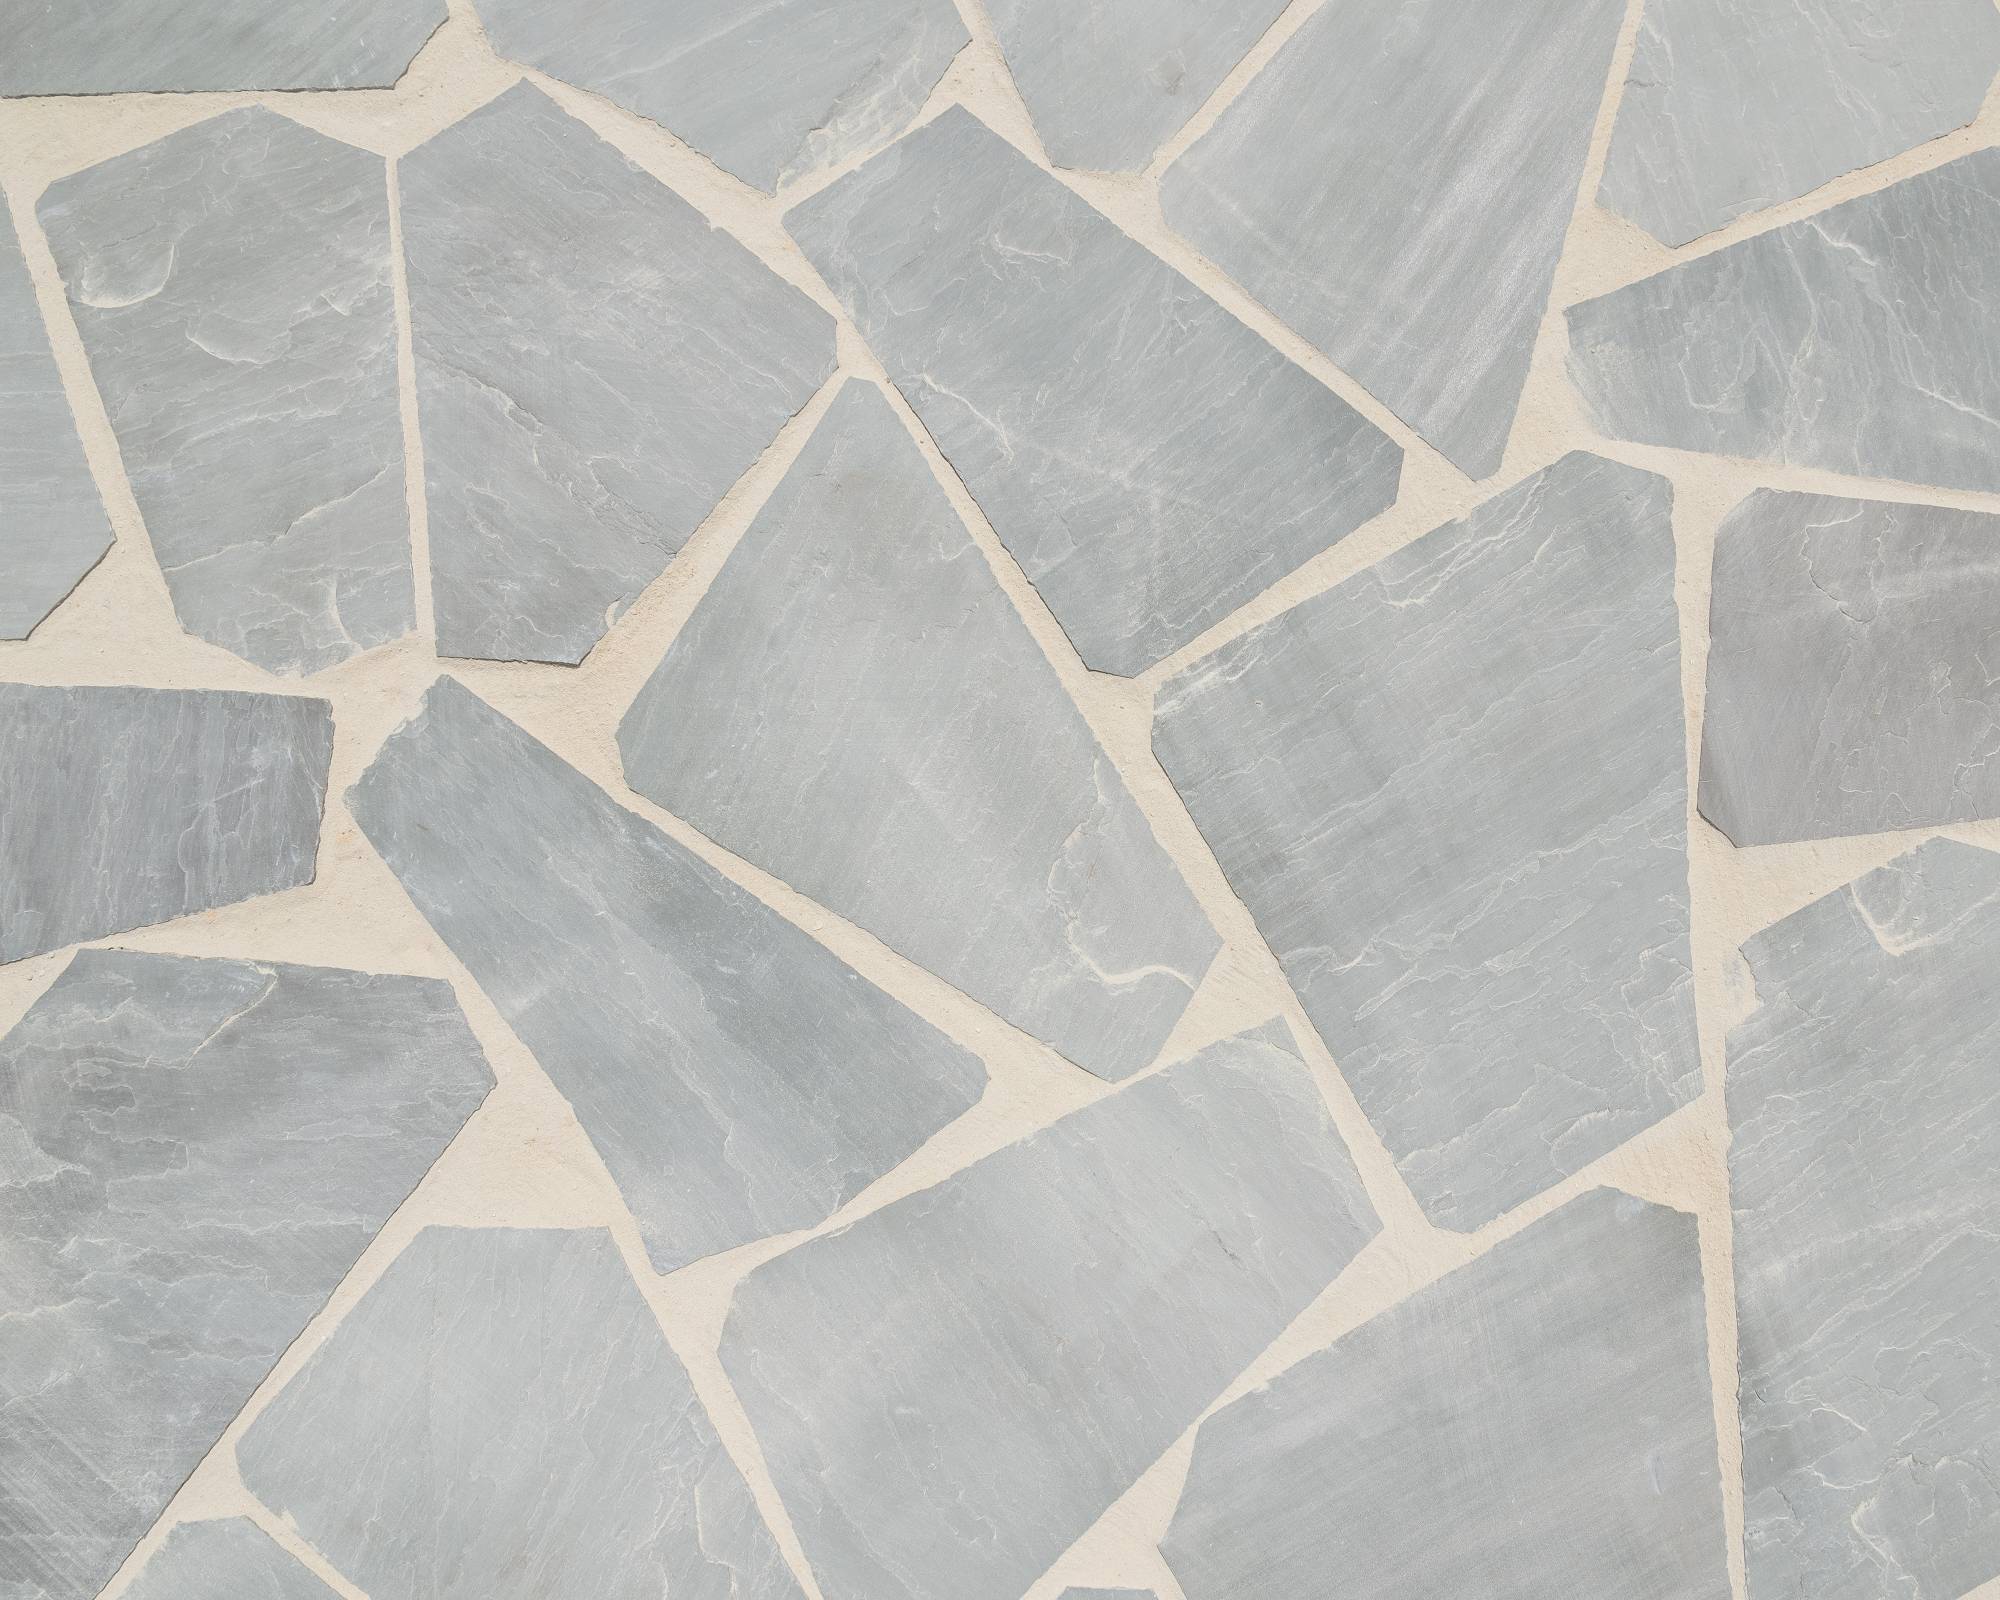 appalacian grey natural stone outdoor paver tile irregular patio pack for patio walkway pool area distributed by surface group manufactured by f and m supply